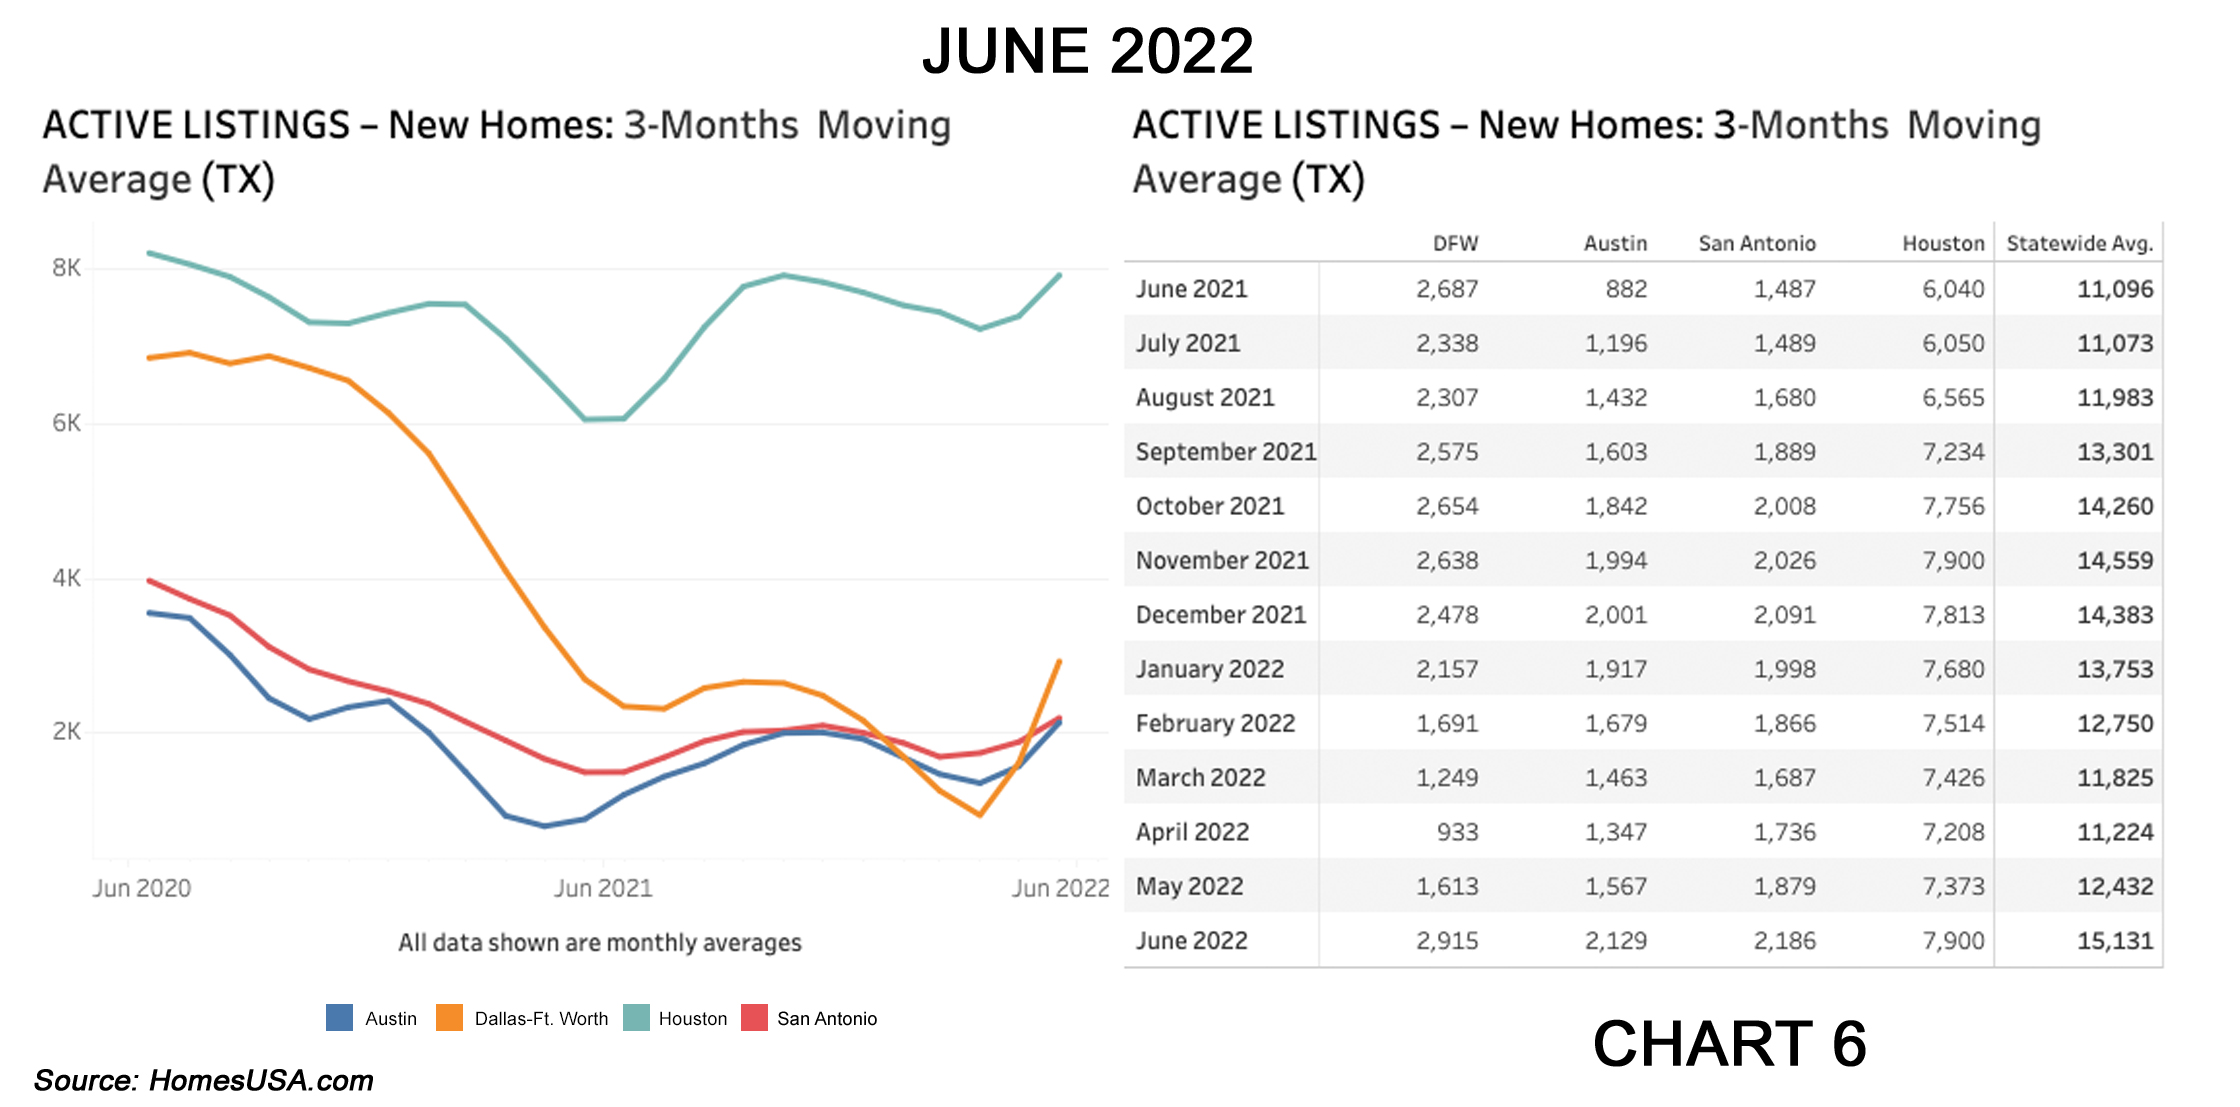 Chart 6: Texas Active Listings for New Home Sales – June 2022